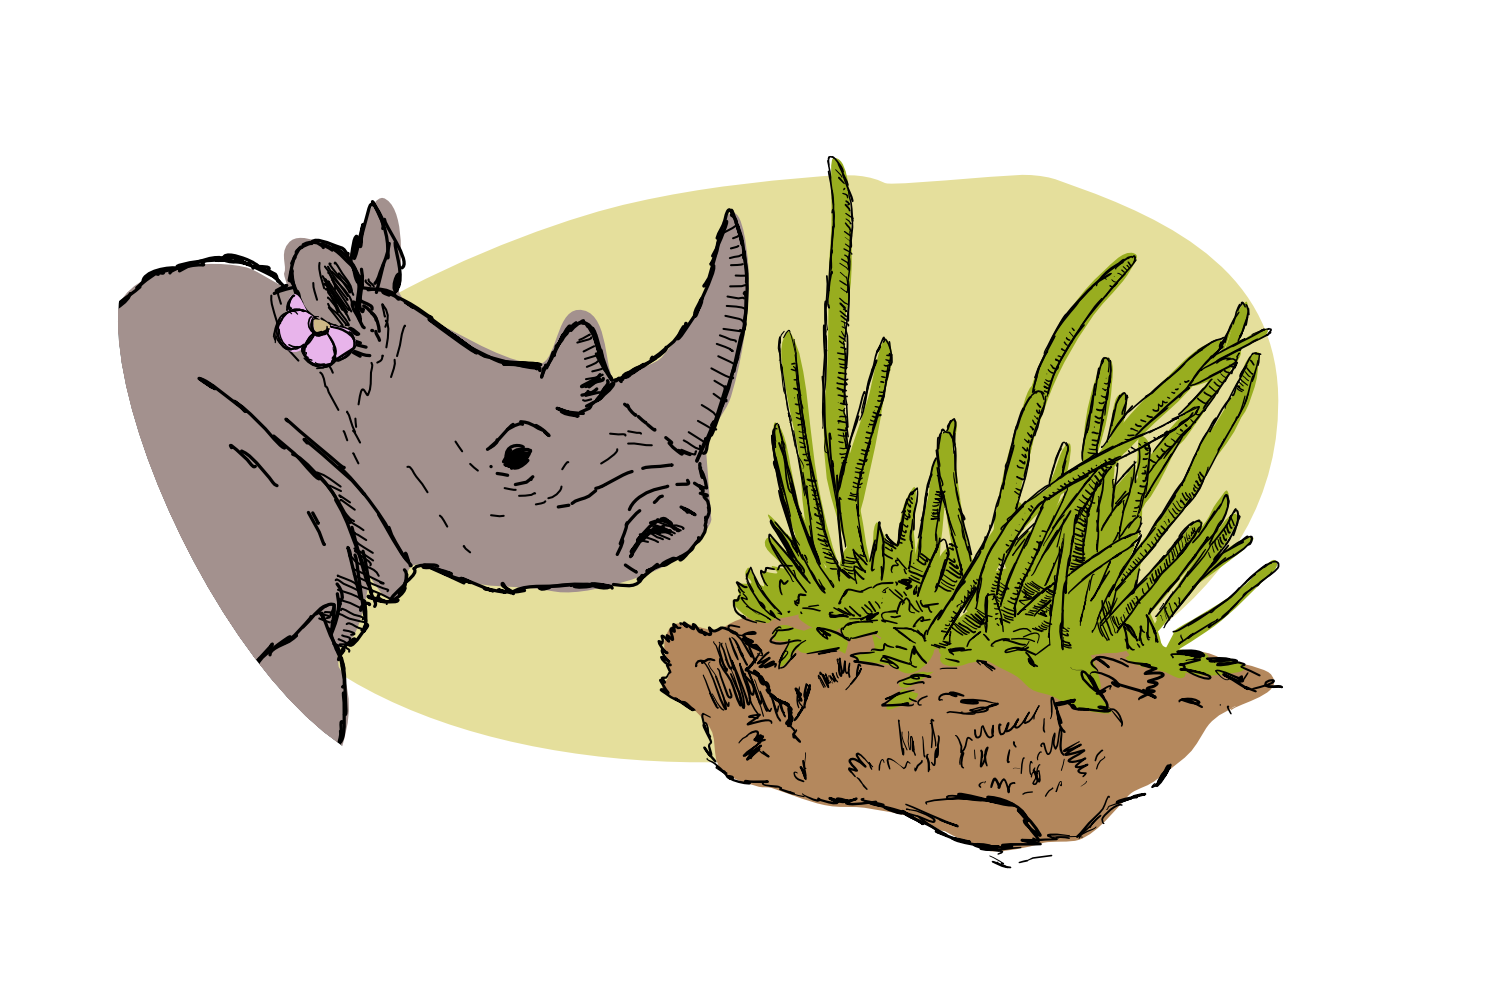 Rhinoceros and Anthoceros are two very different things